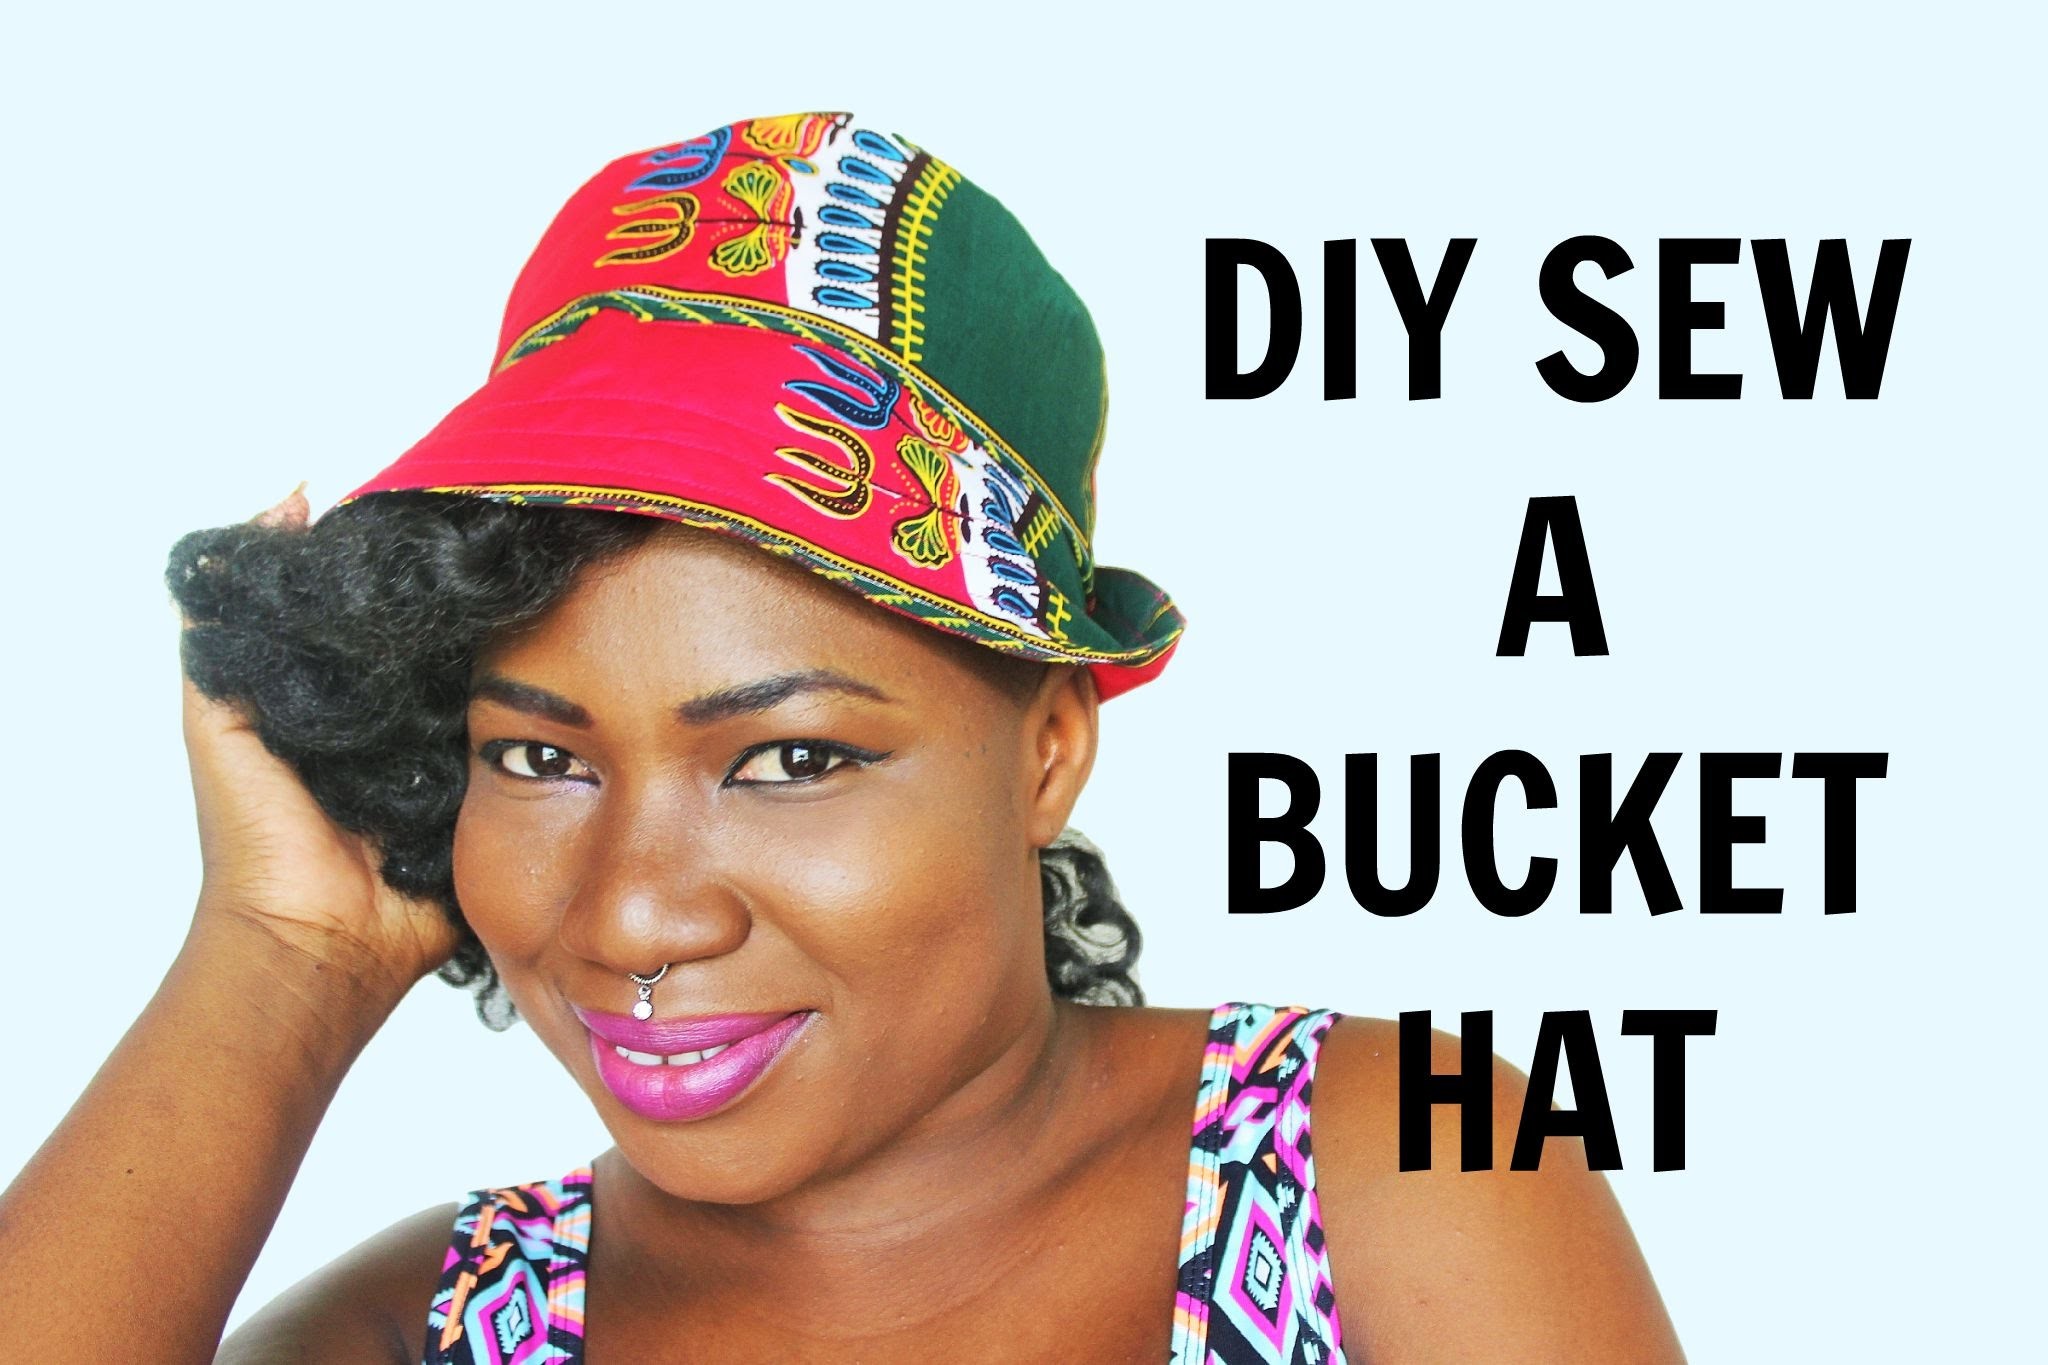 How to Sew a bucket hat. DIY Sew a Bucket Hat